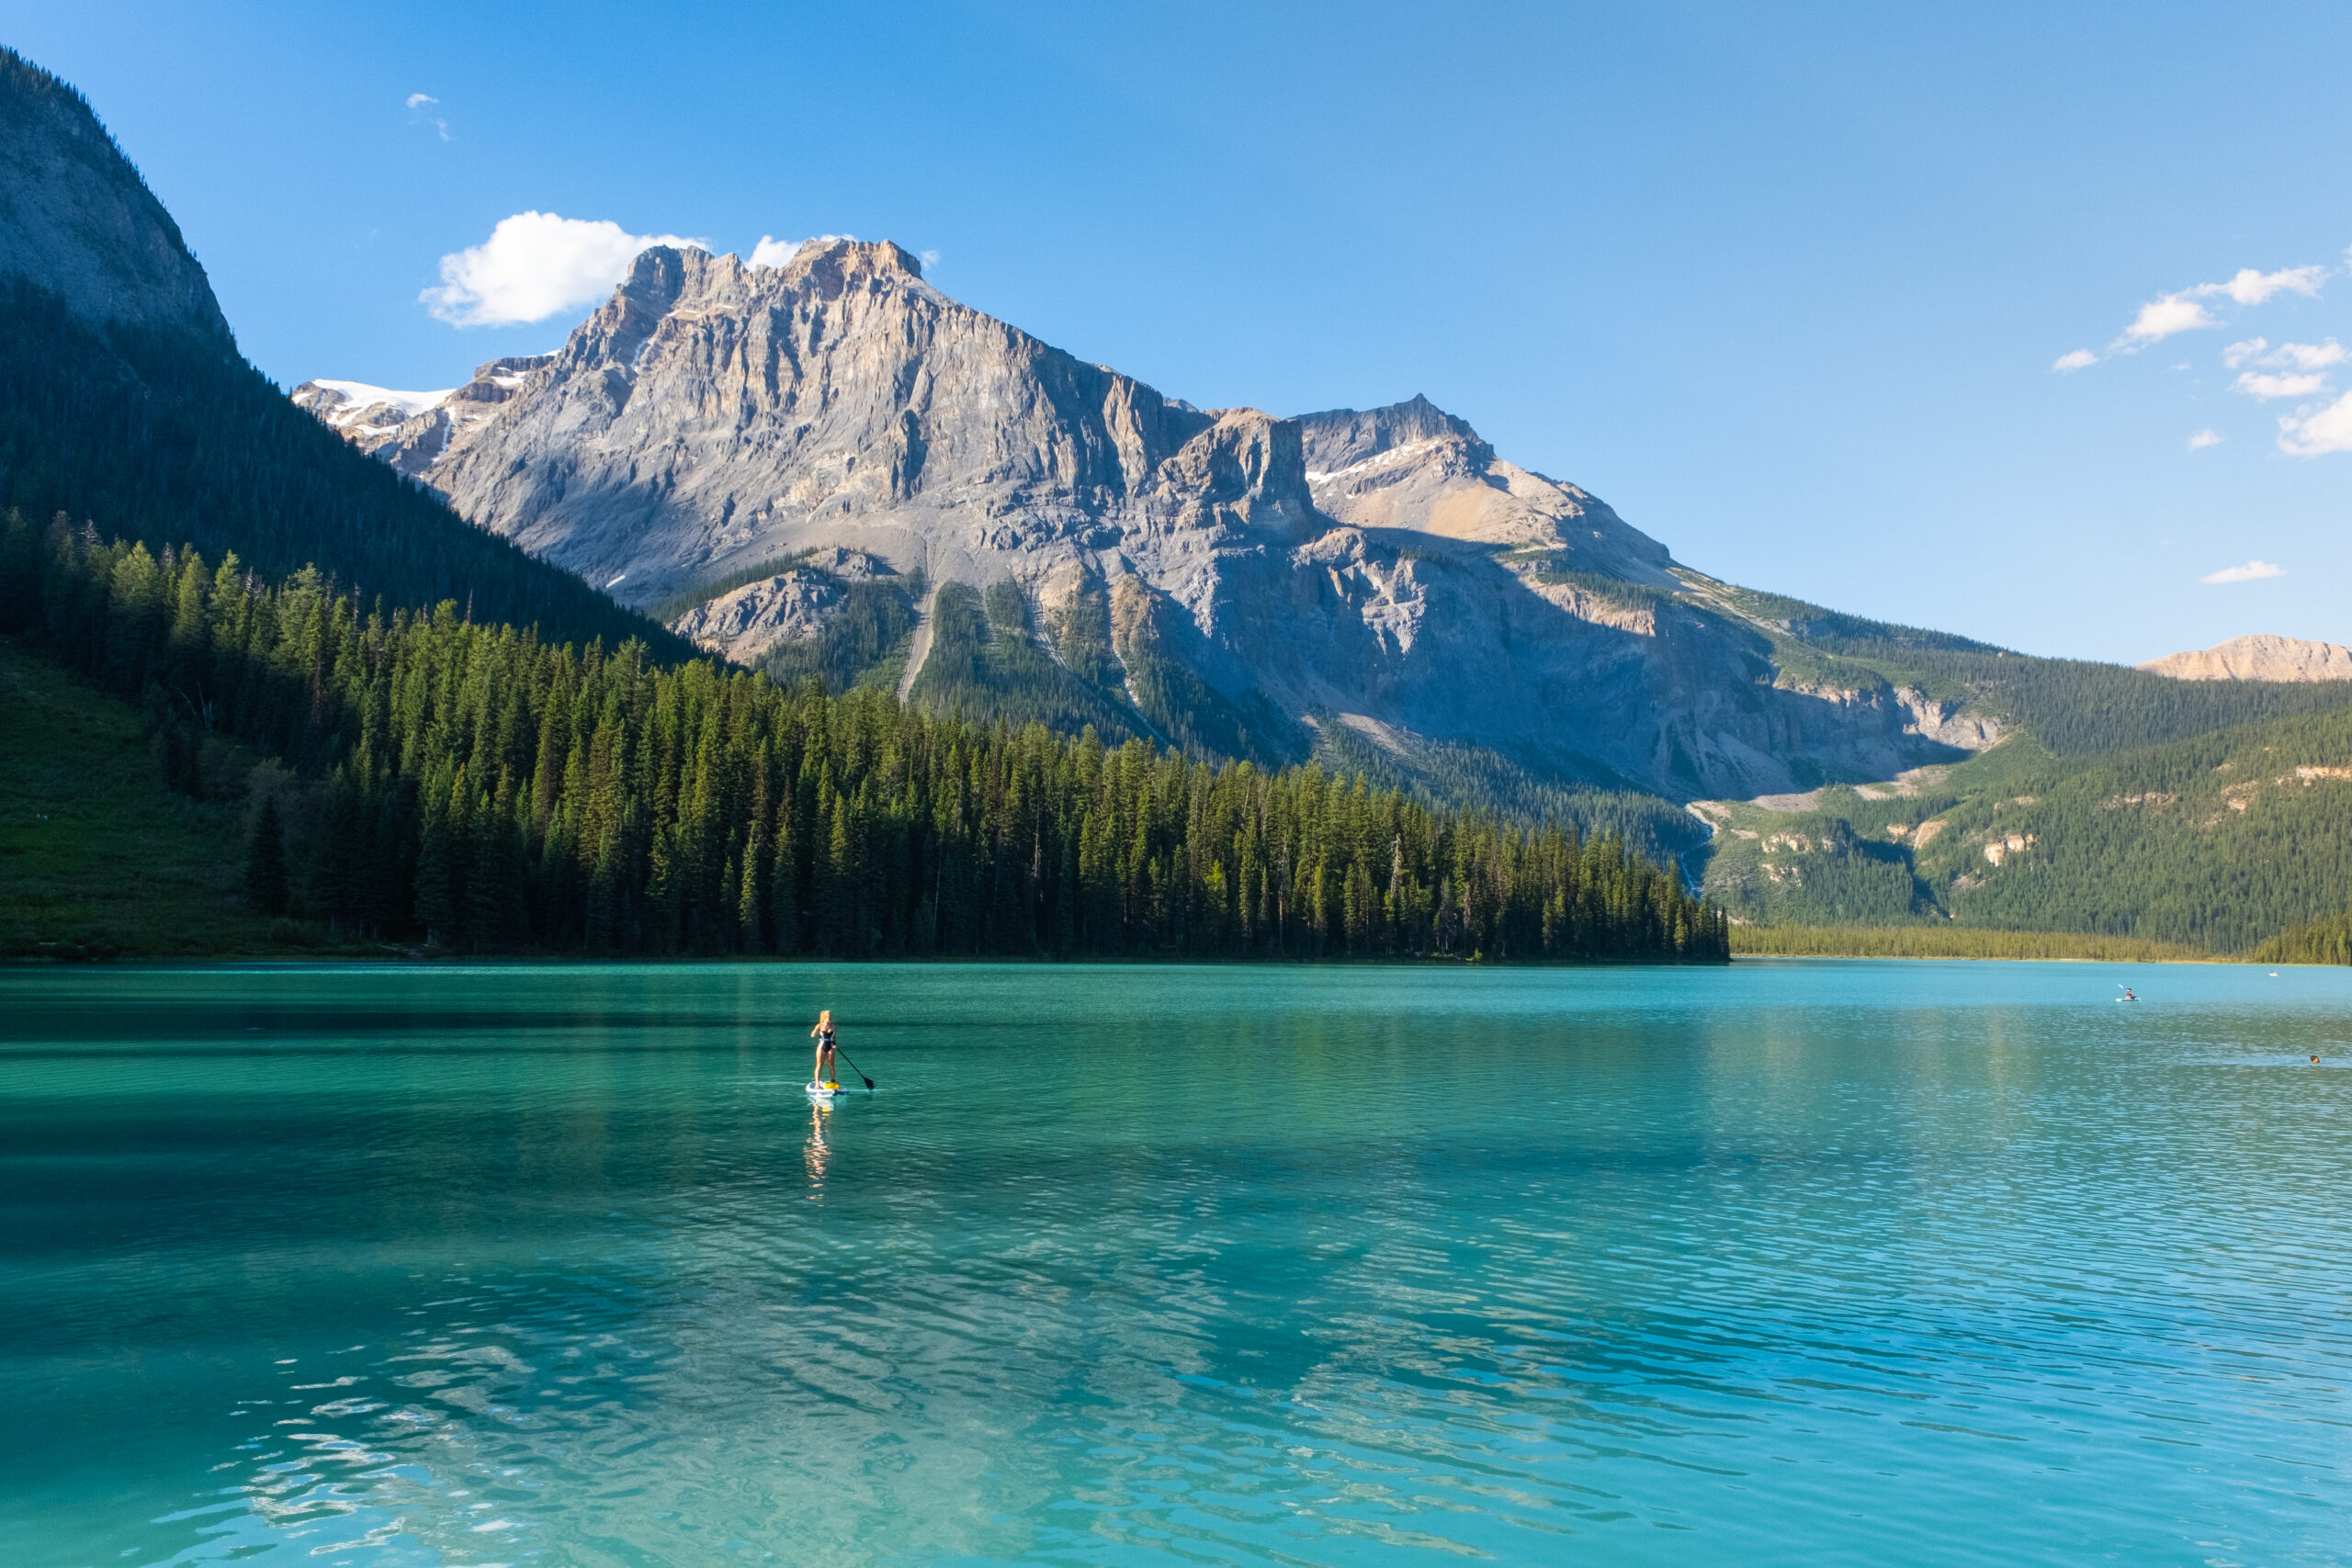 Do You Need a Parks Pass For Emerald Lake?